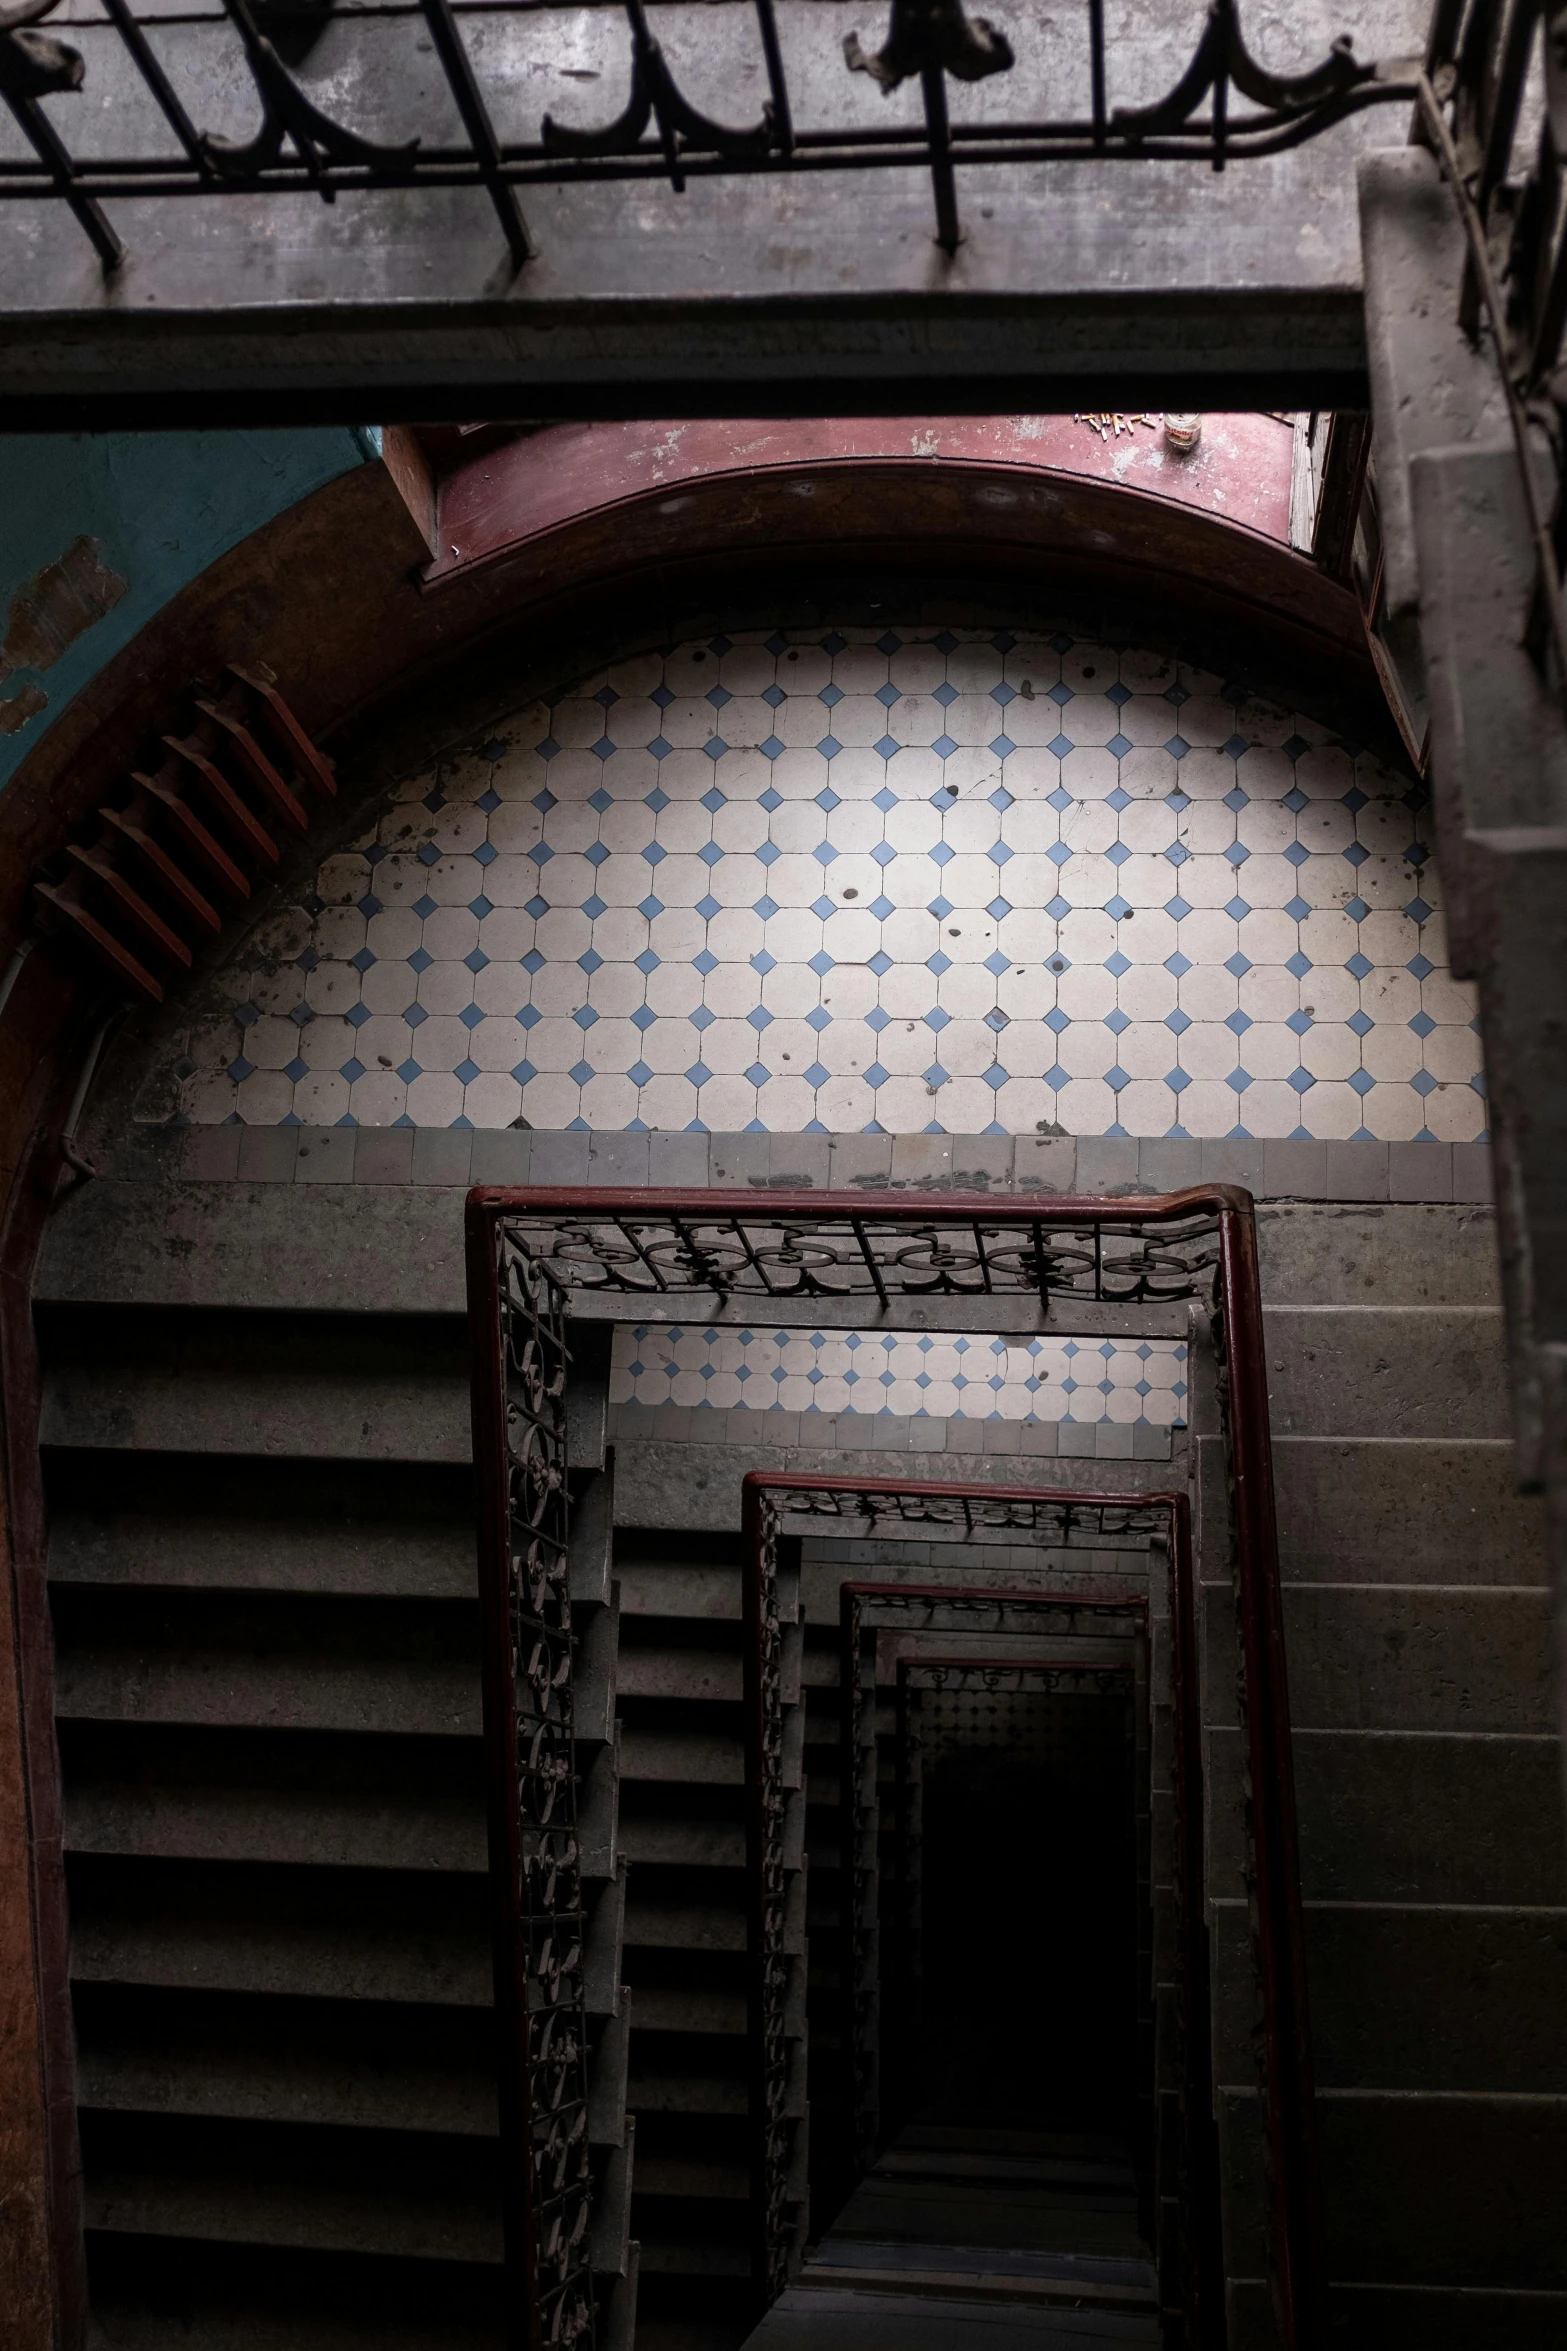 a set of stairs going up to the top of a building, inspired by M. C. Escher, art nouveau, tiled room squared waterway, alessio albi, intricate environment - n 9, dark photo